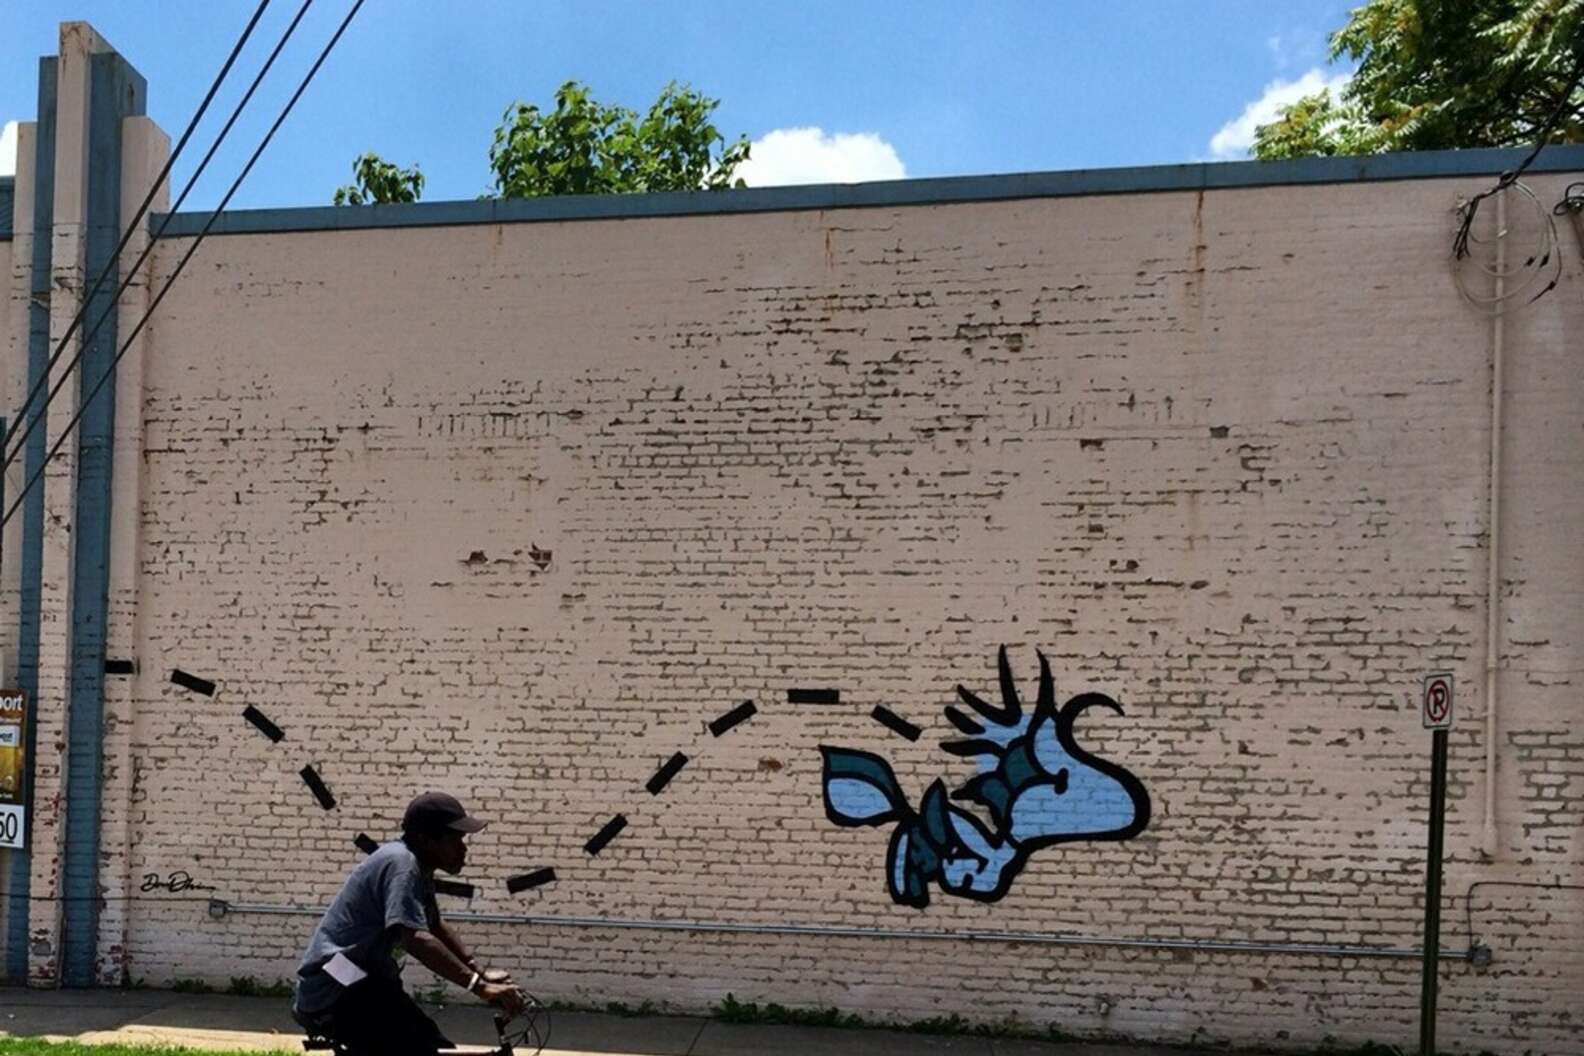 Photo Courtesy of Richmond Mural Project